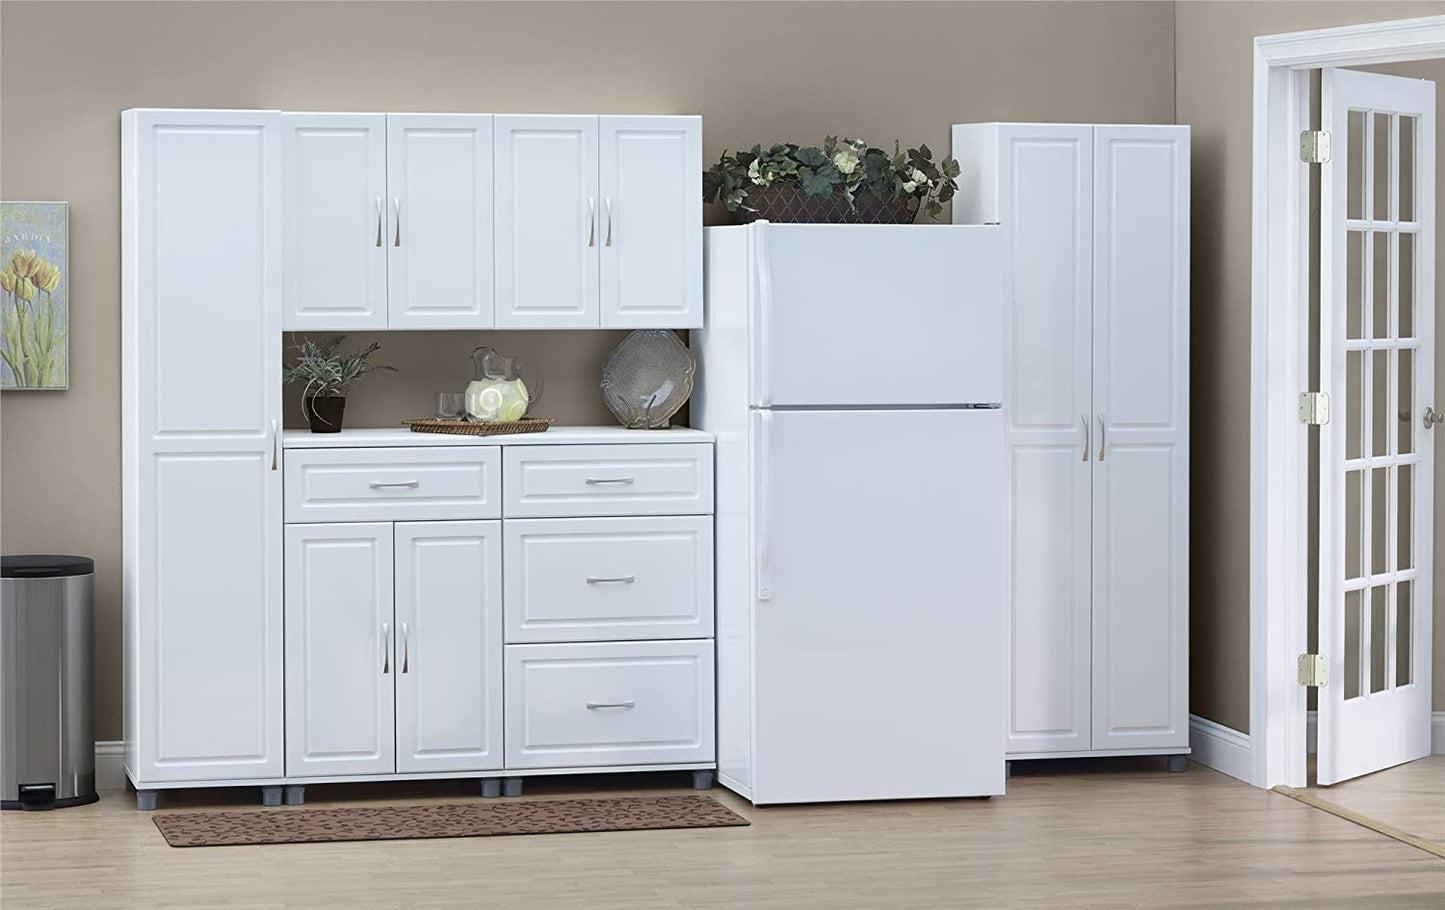 Wemoh  Kendall 54" Wall Cabinet - White